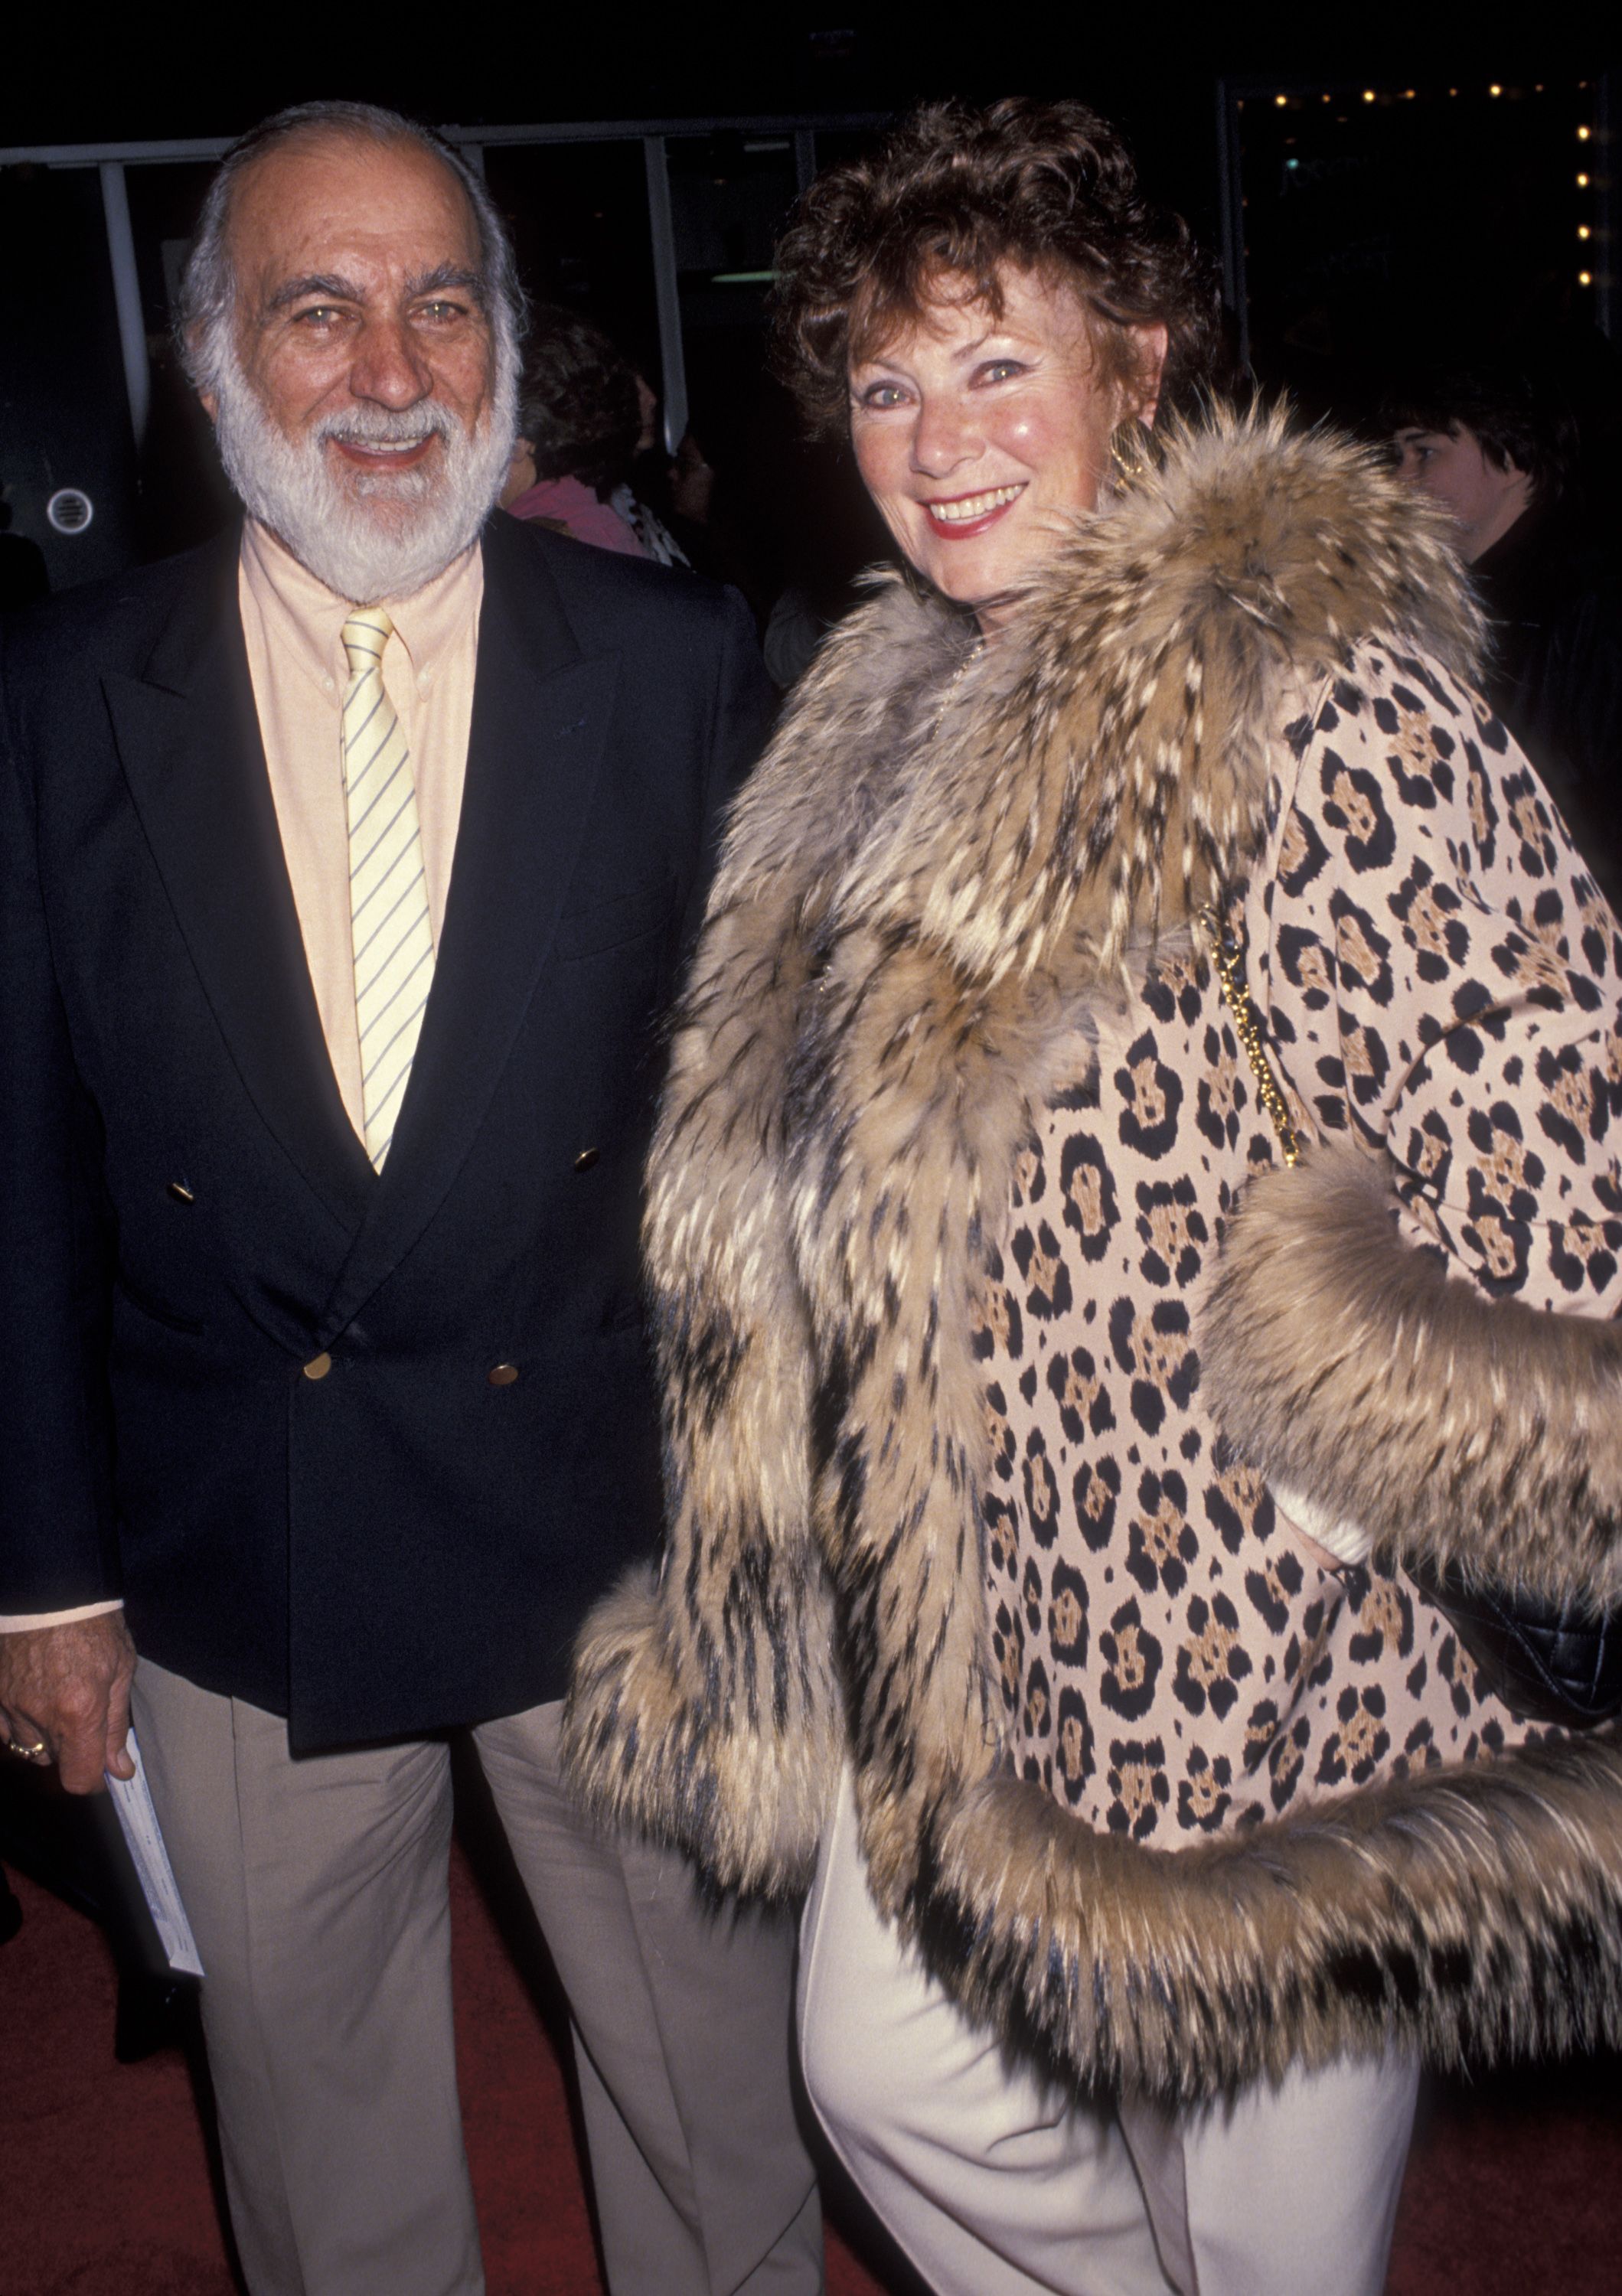 Marion Ross and Paul Michael attending the opening night of 'Joseph and the Amazing Technicolor Dreamcoat' on February 25, 1993 at the Pantages Theater in Hollywood, California | Source: Getty Images